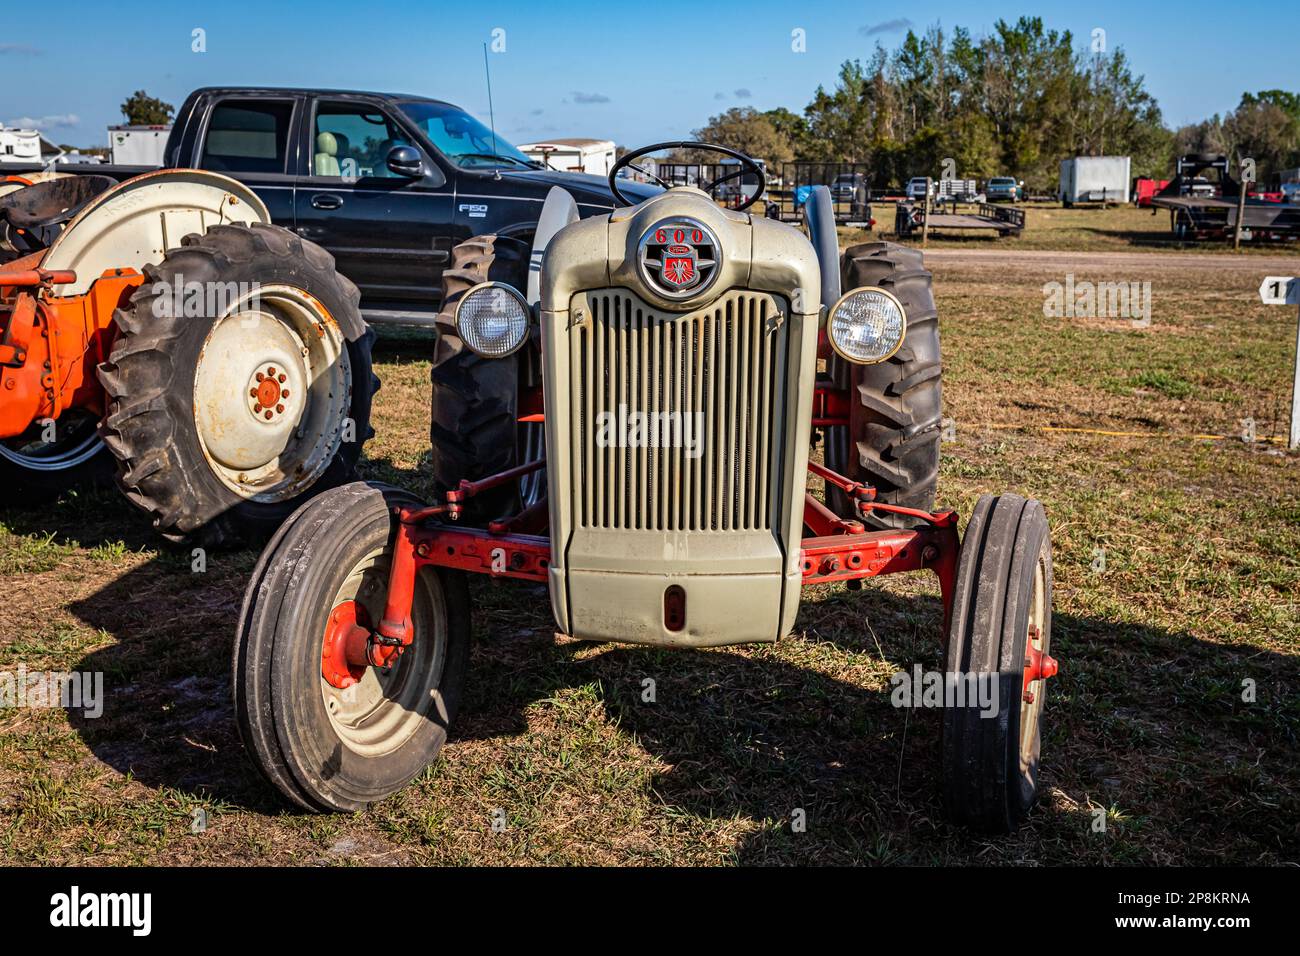 Fort Meade, FL - February 26, 2022: High perspective front view of a 1957 Ford Model 660 Tractor at a local tractor show. Stock Photo